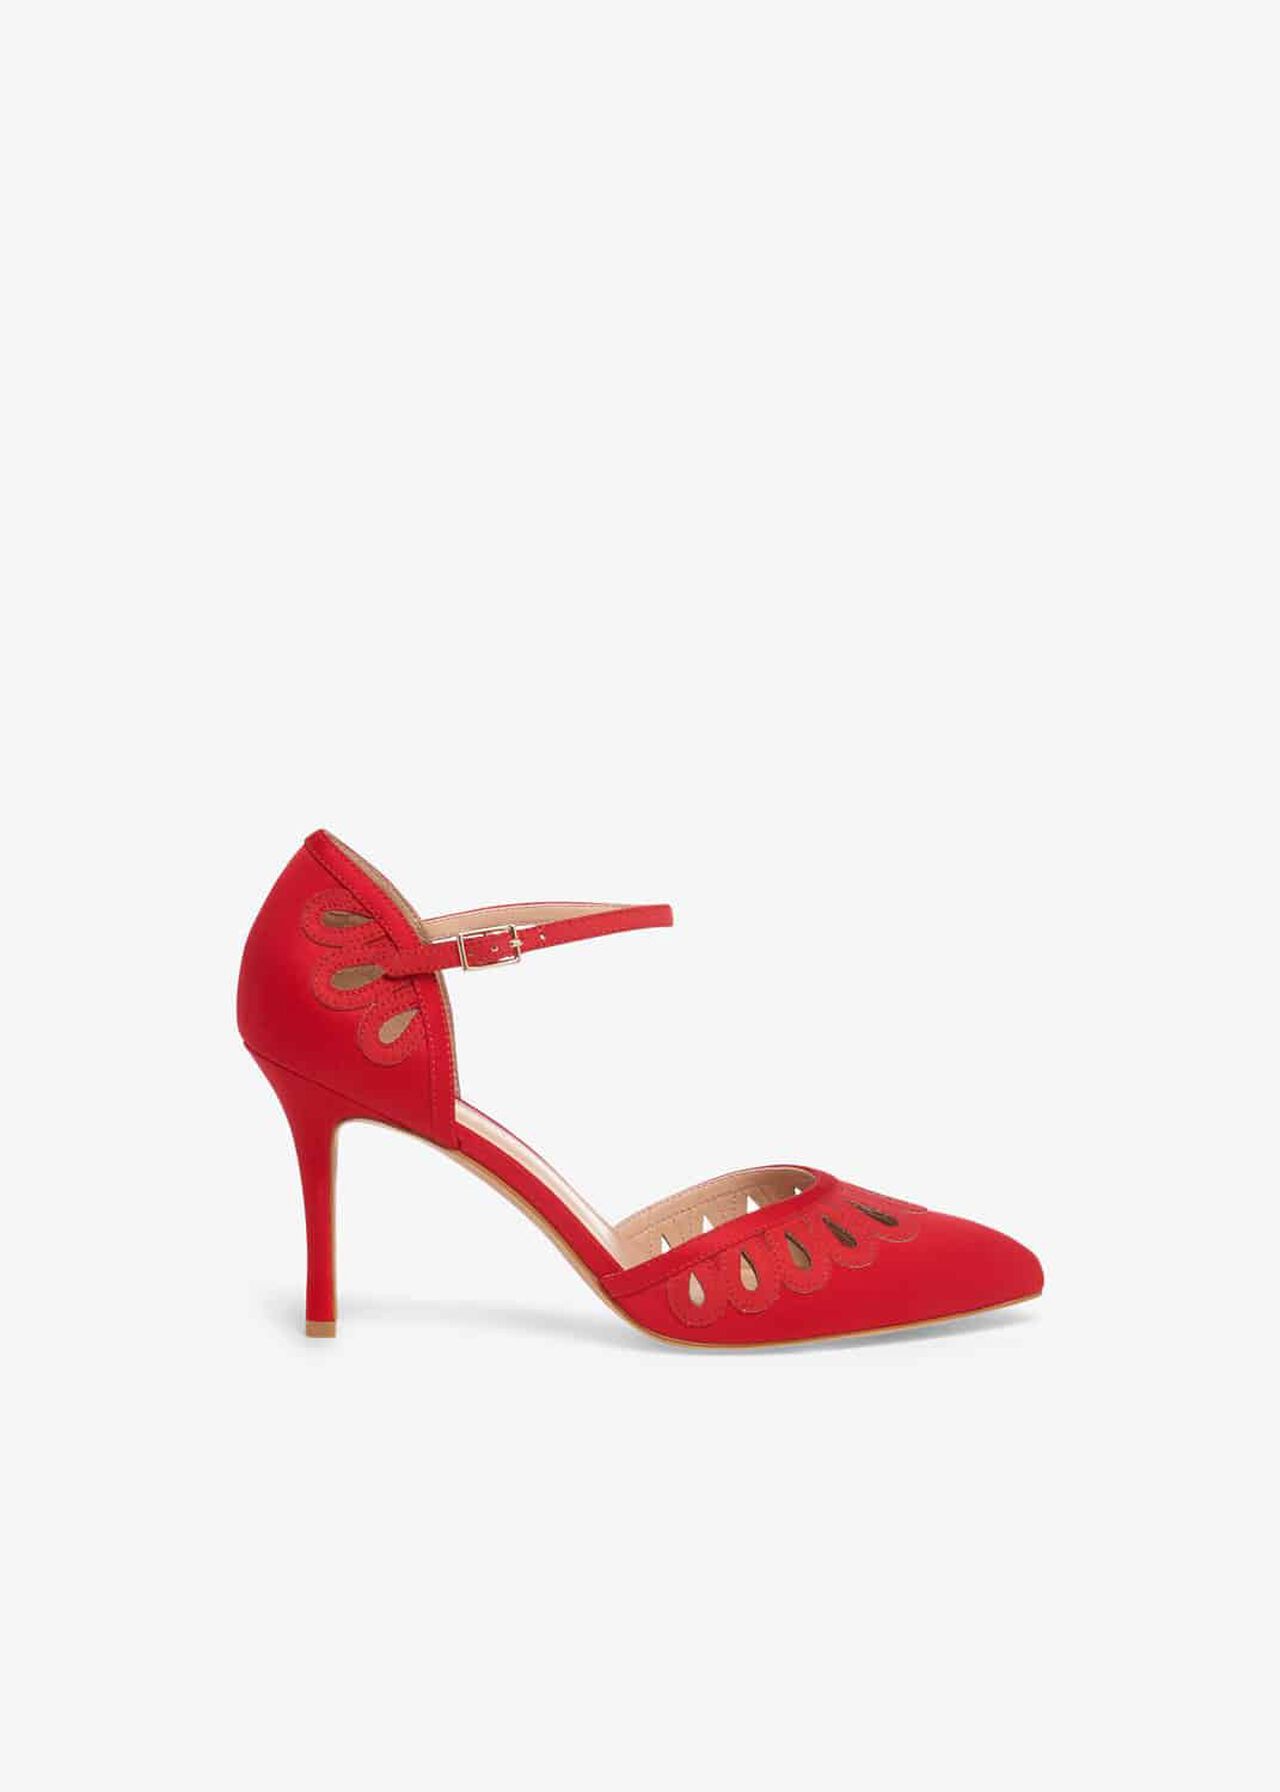 Gracie Laser Cut Court Shoes | Phase Eight